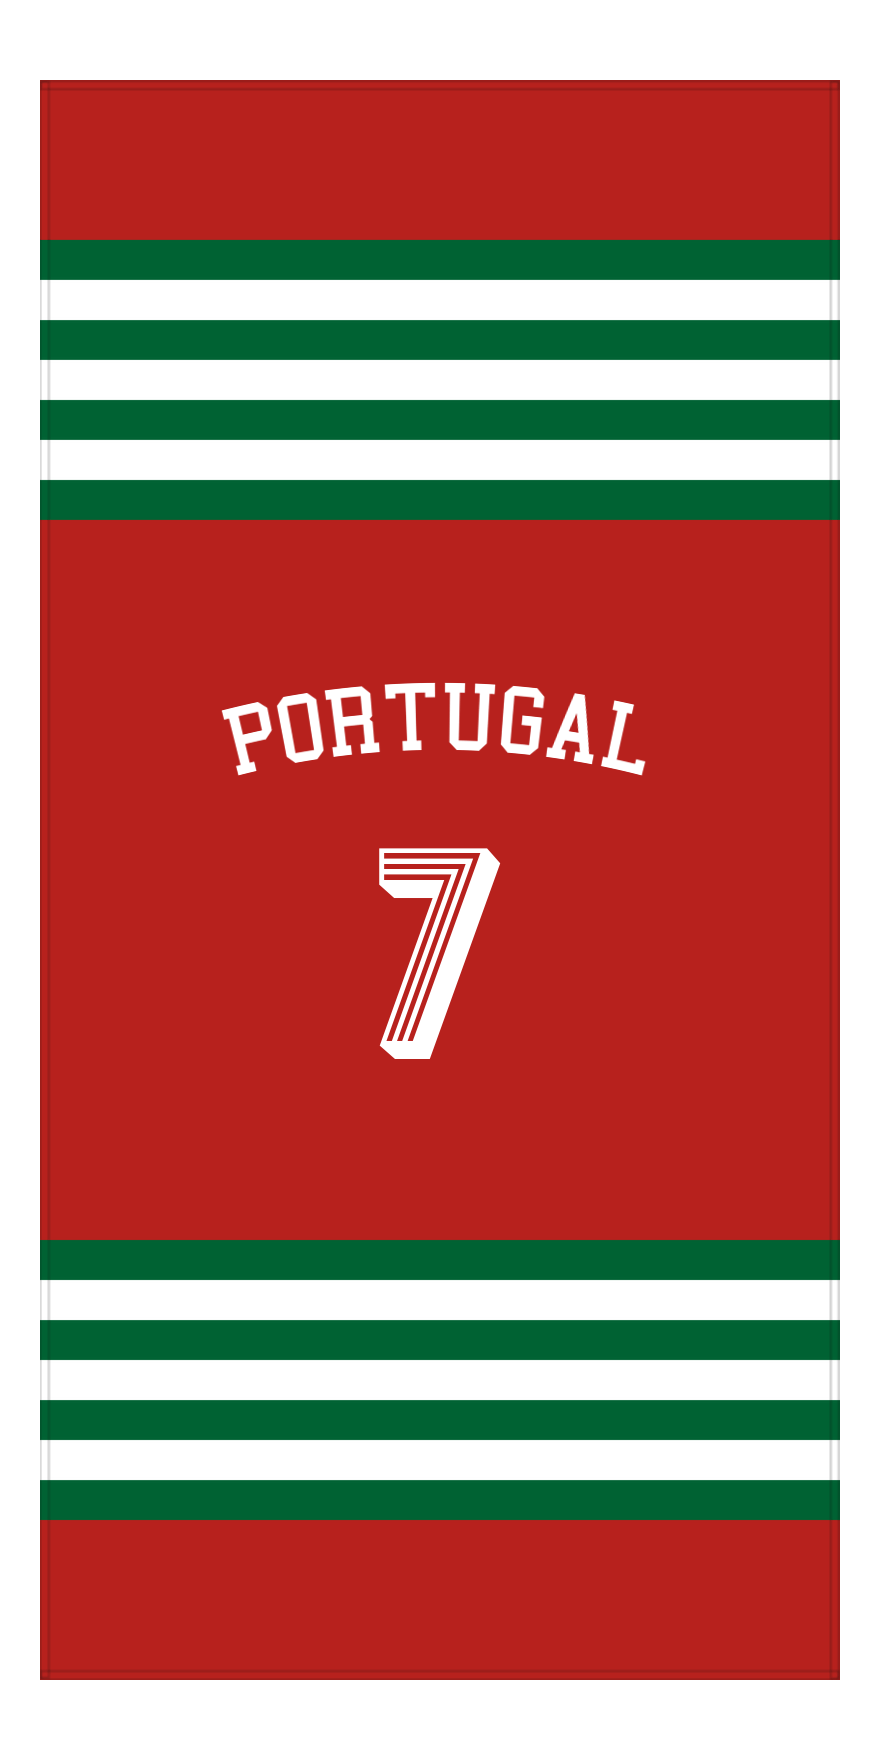 Personalized Jersey Number 3-on-1 Stripes Sports Beach Towel with Arched Name - Portugal - Vertical Design - Front View